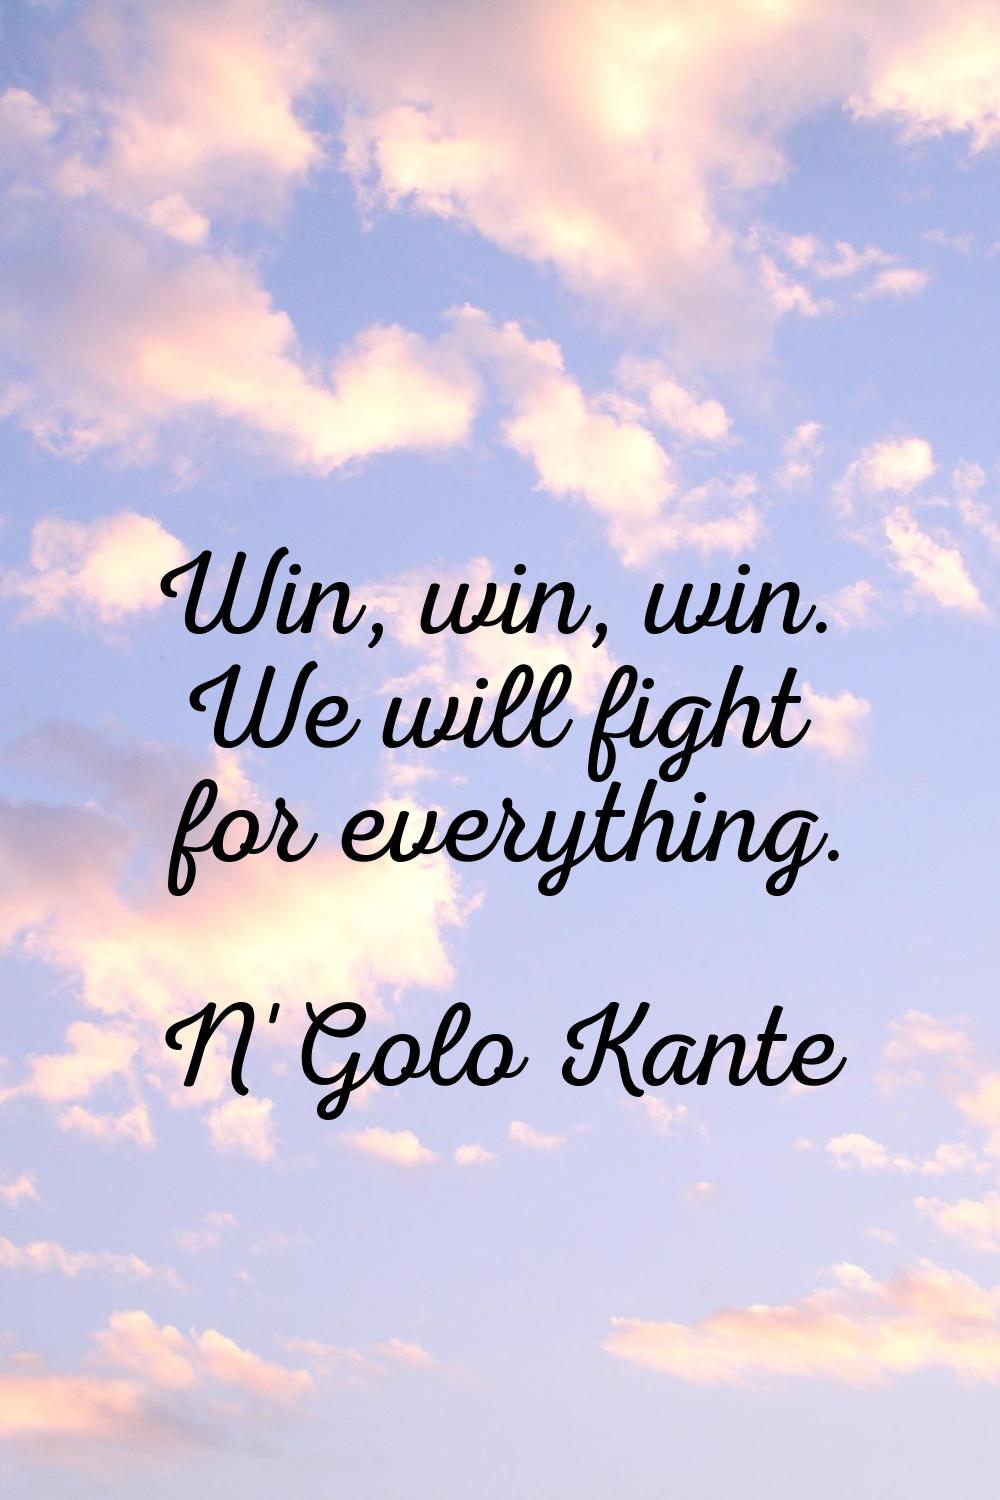 Win, win, win. We will fight for everything.